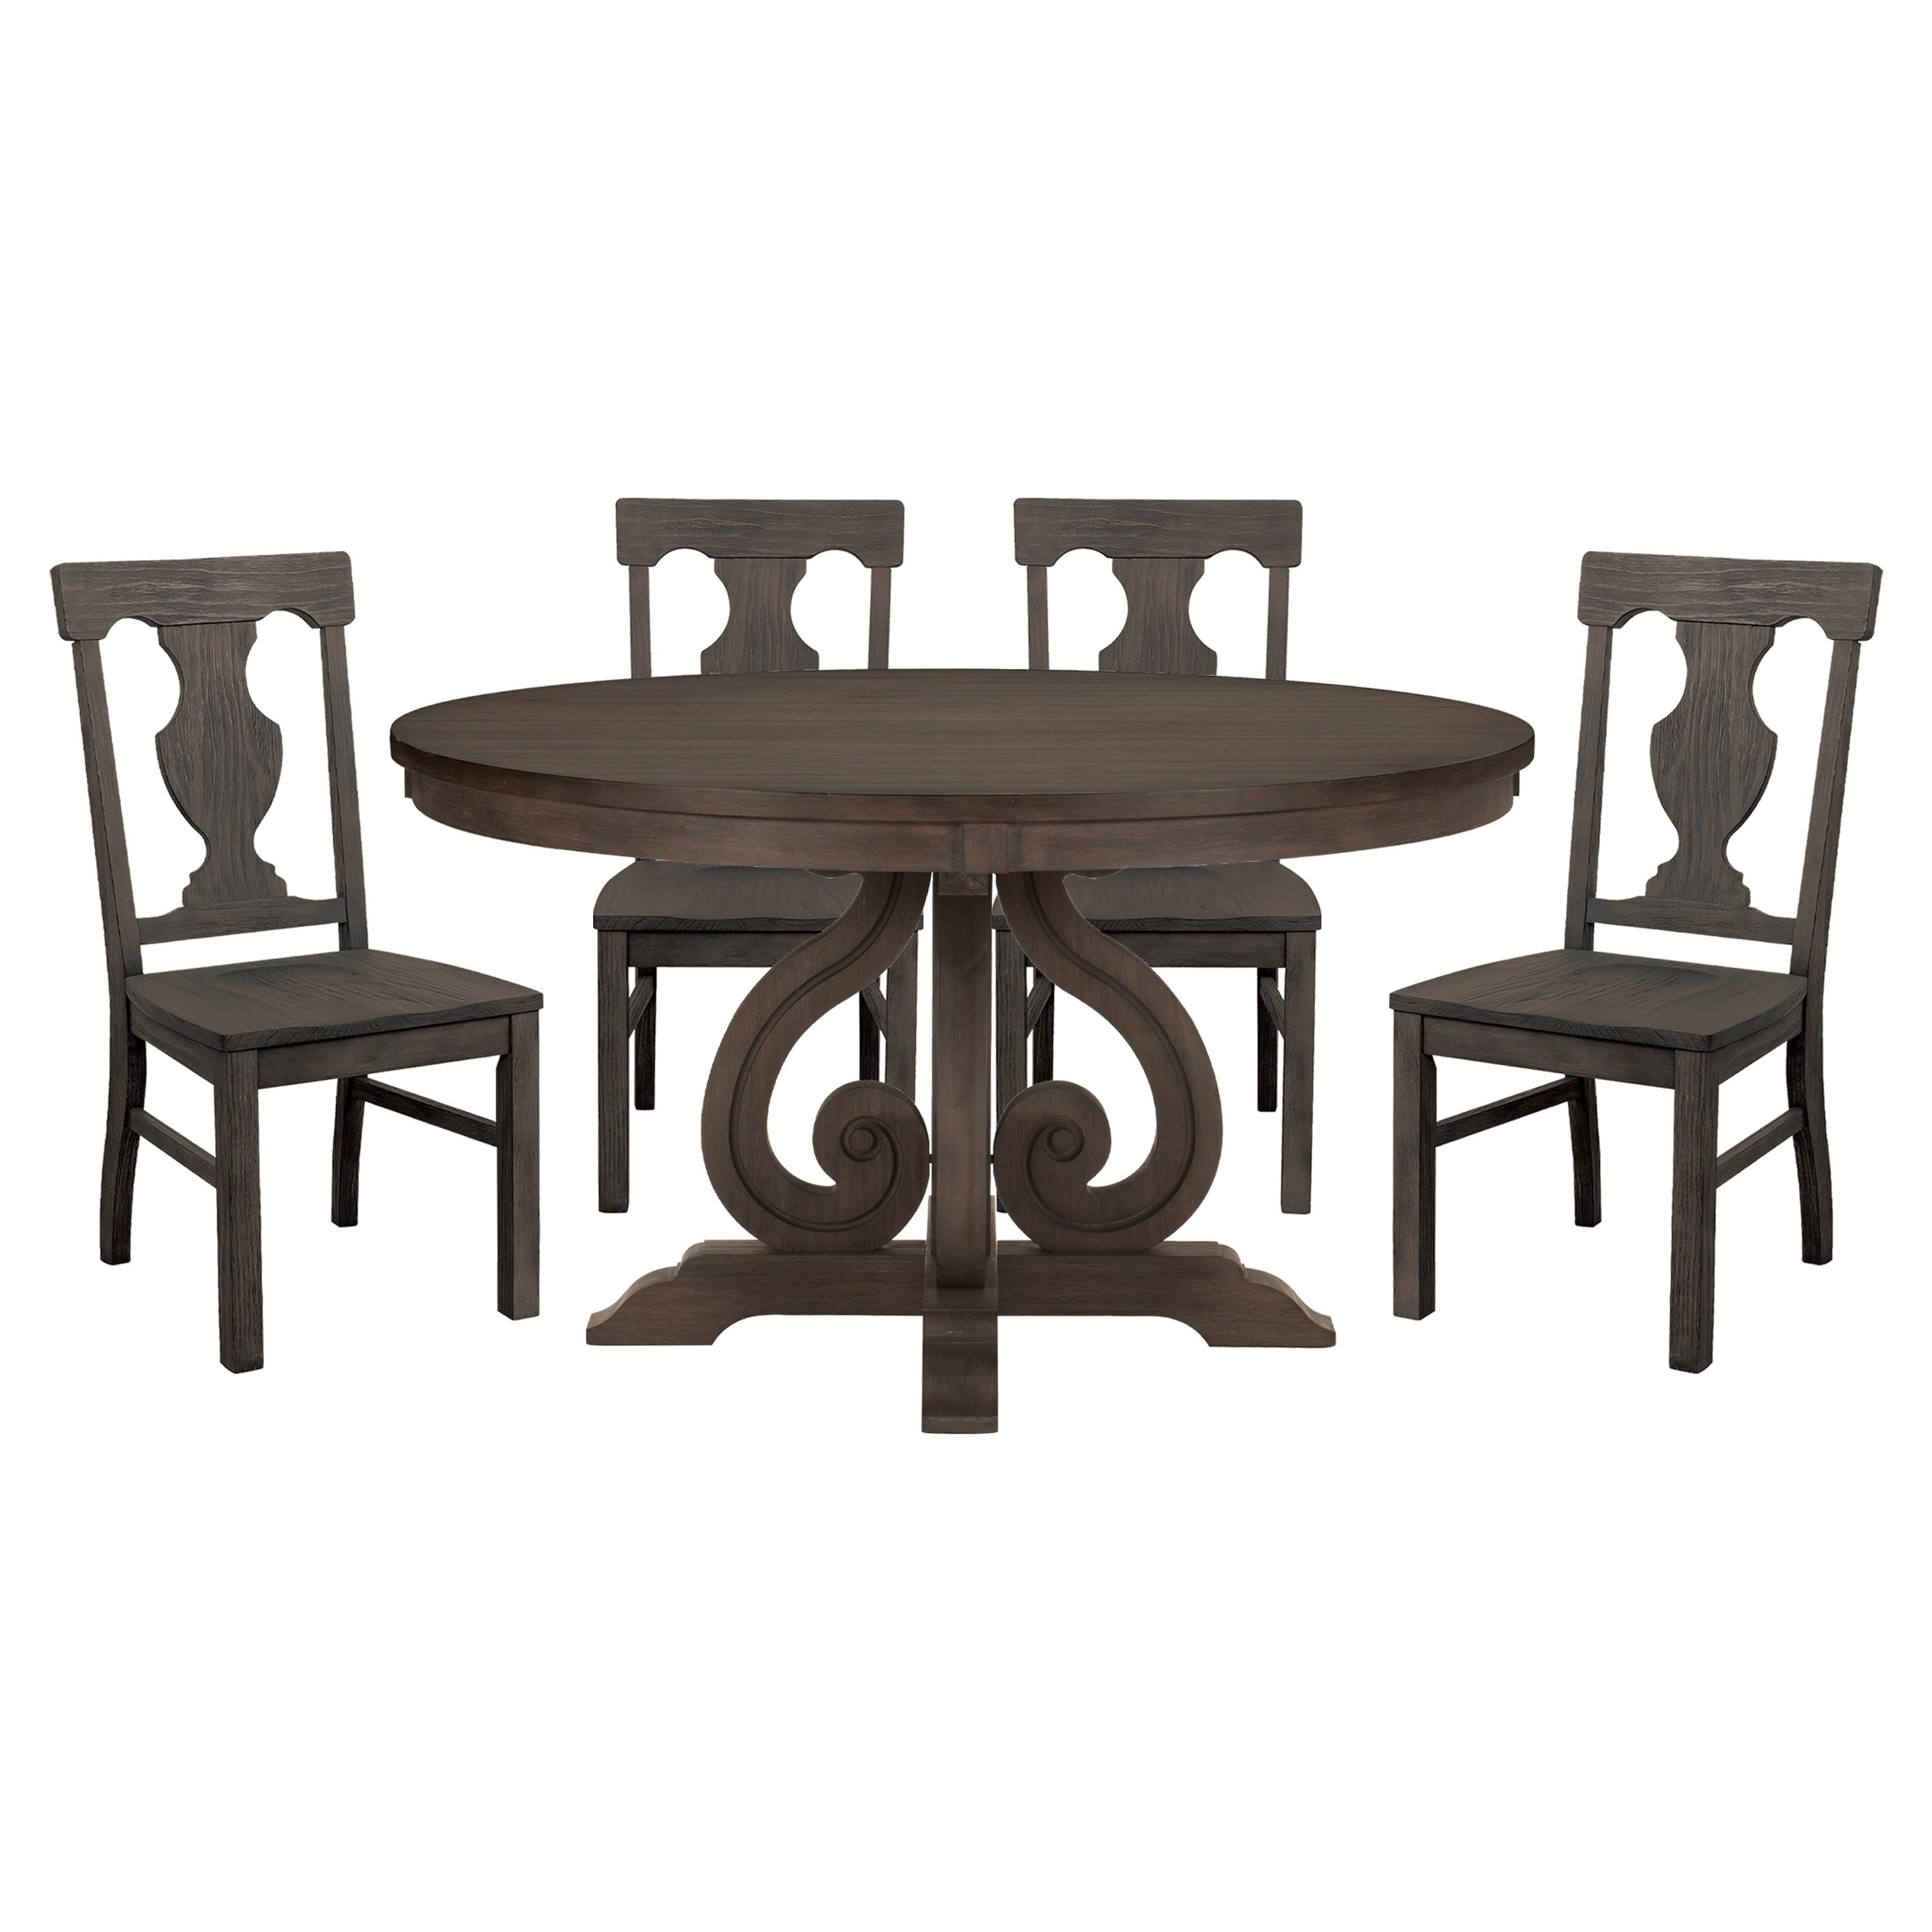 Traditional Dining Room Set 5438-54*5PC Toulon 5438-54*5PC in Dark Oak 